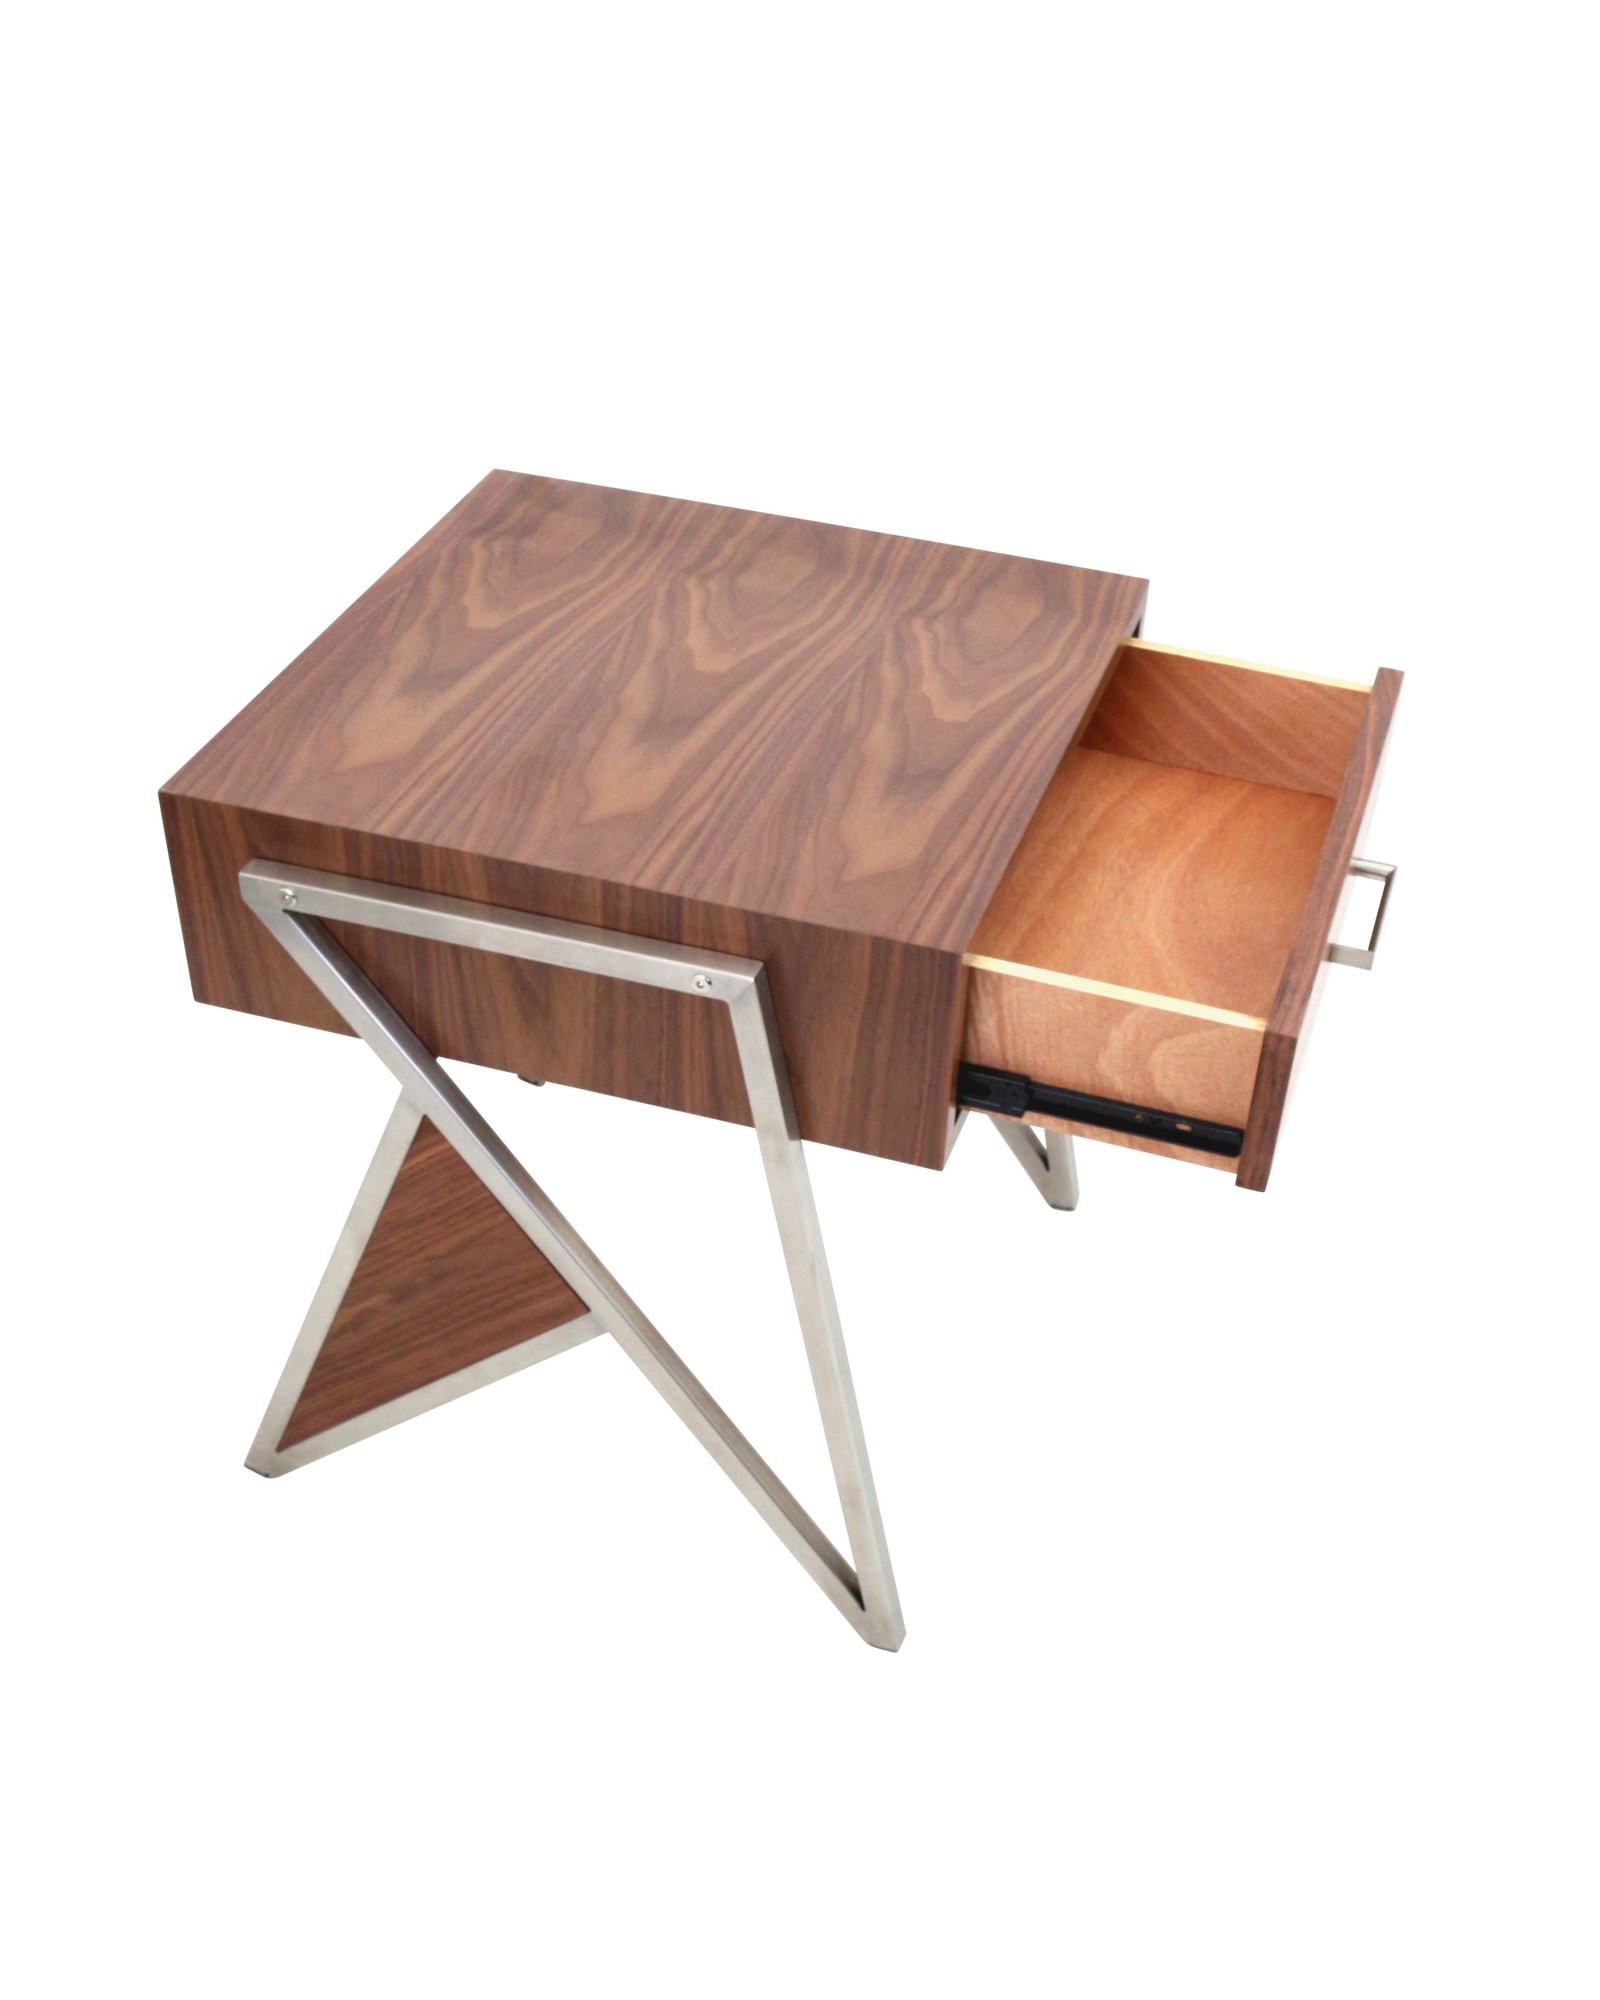 Tetra Contemporary End Table in Walnut Wood and Stainless Steel